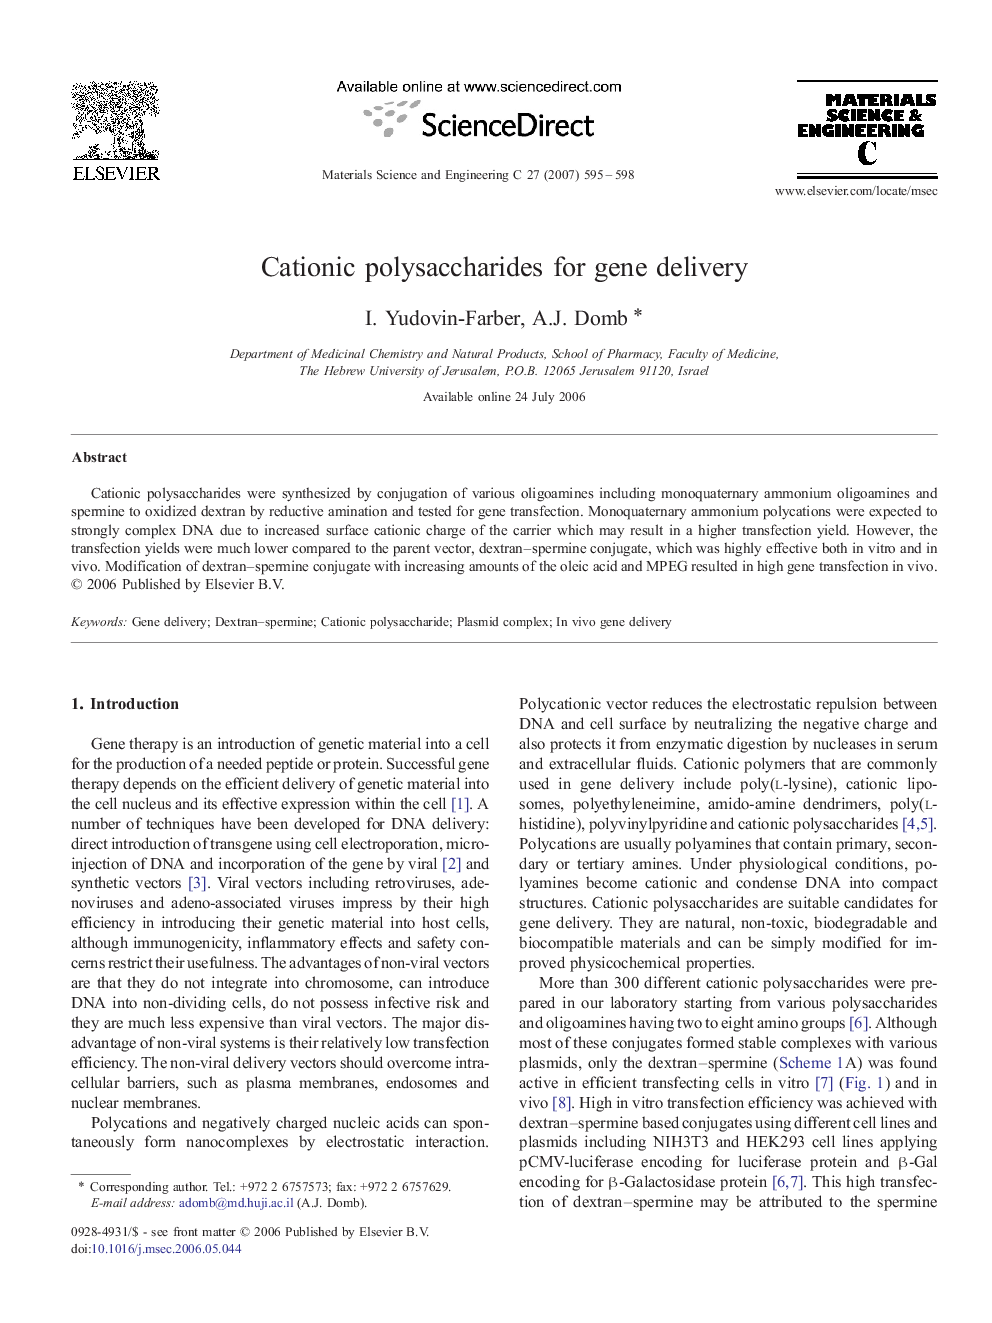 Cationic polysaccharides for gene delivery